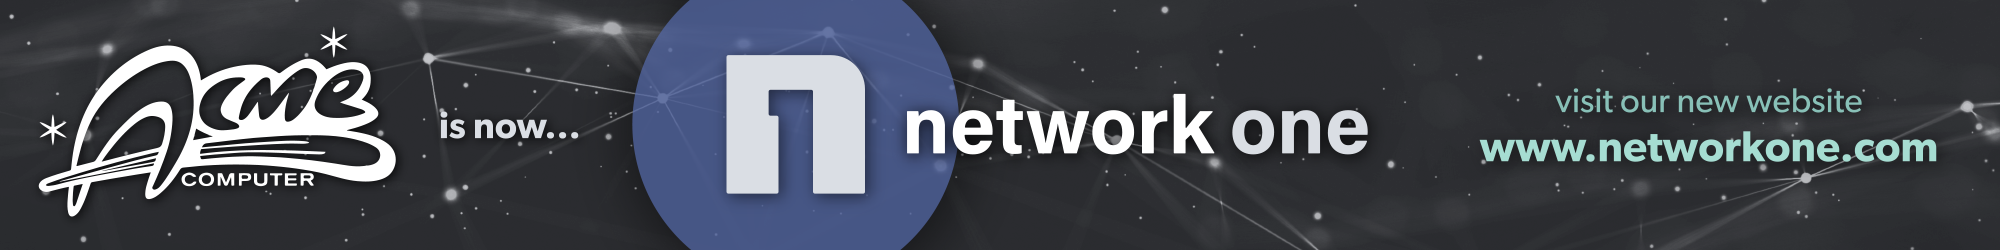 Acme is now Network One